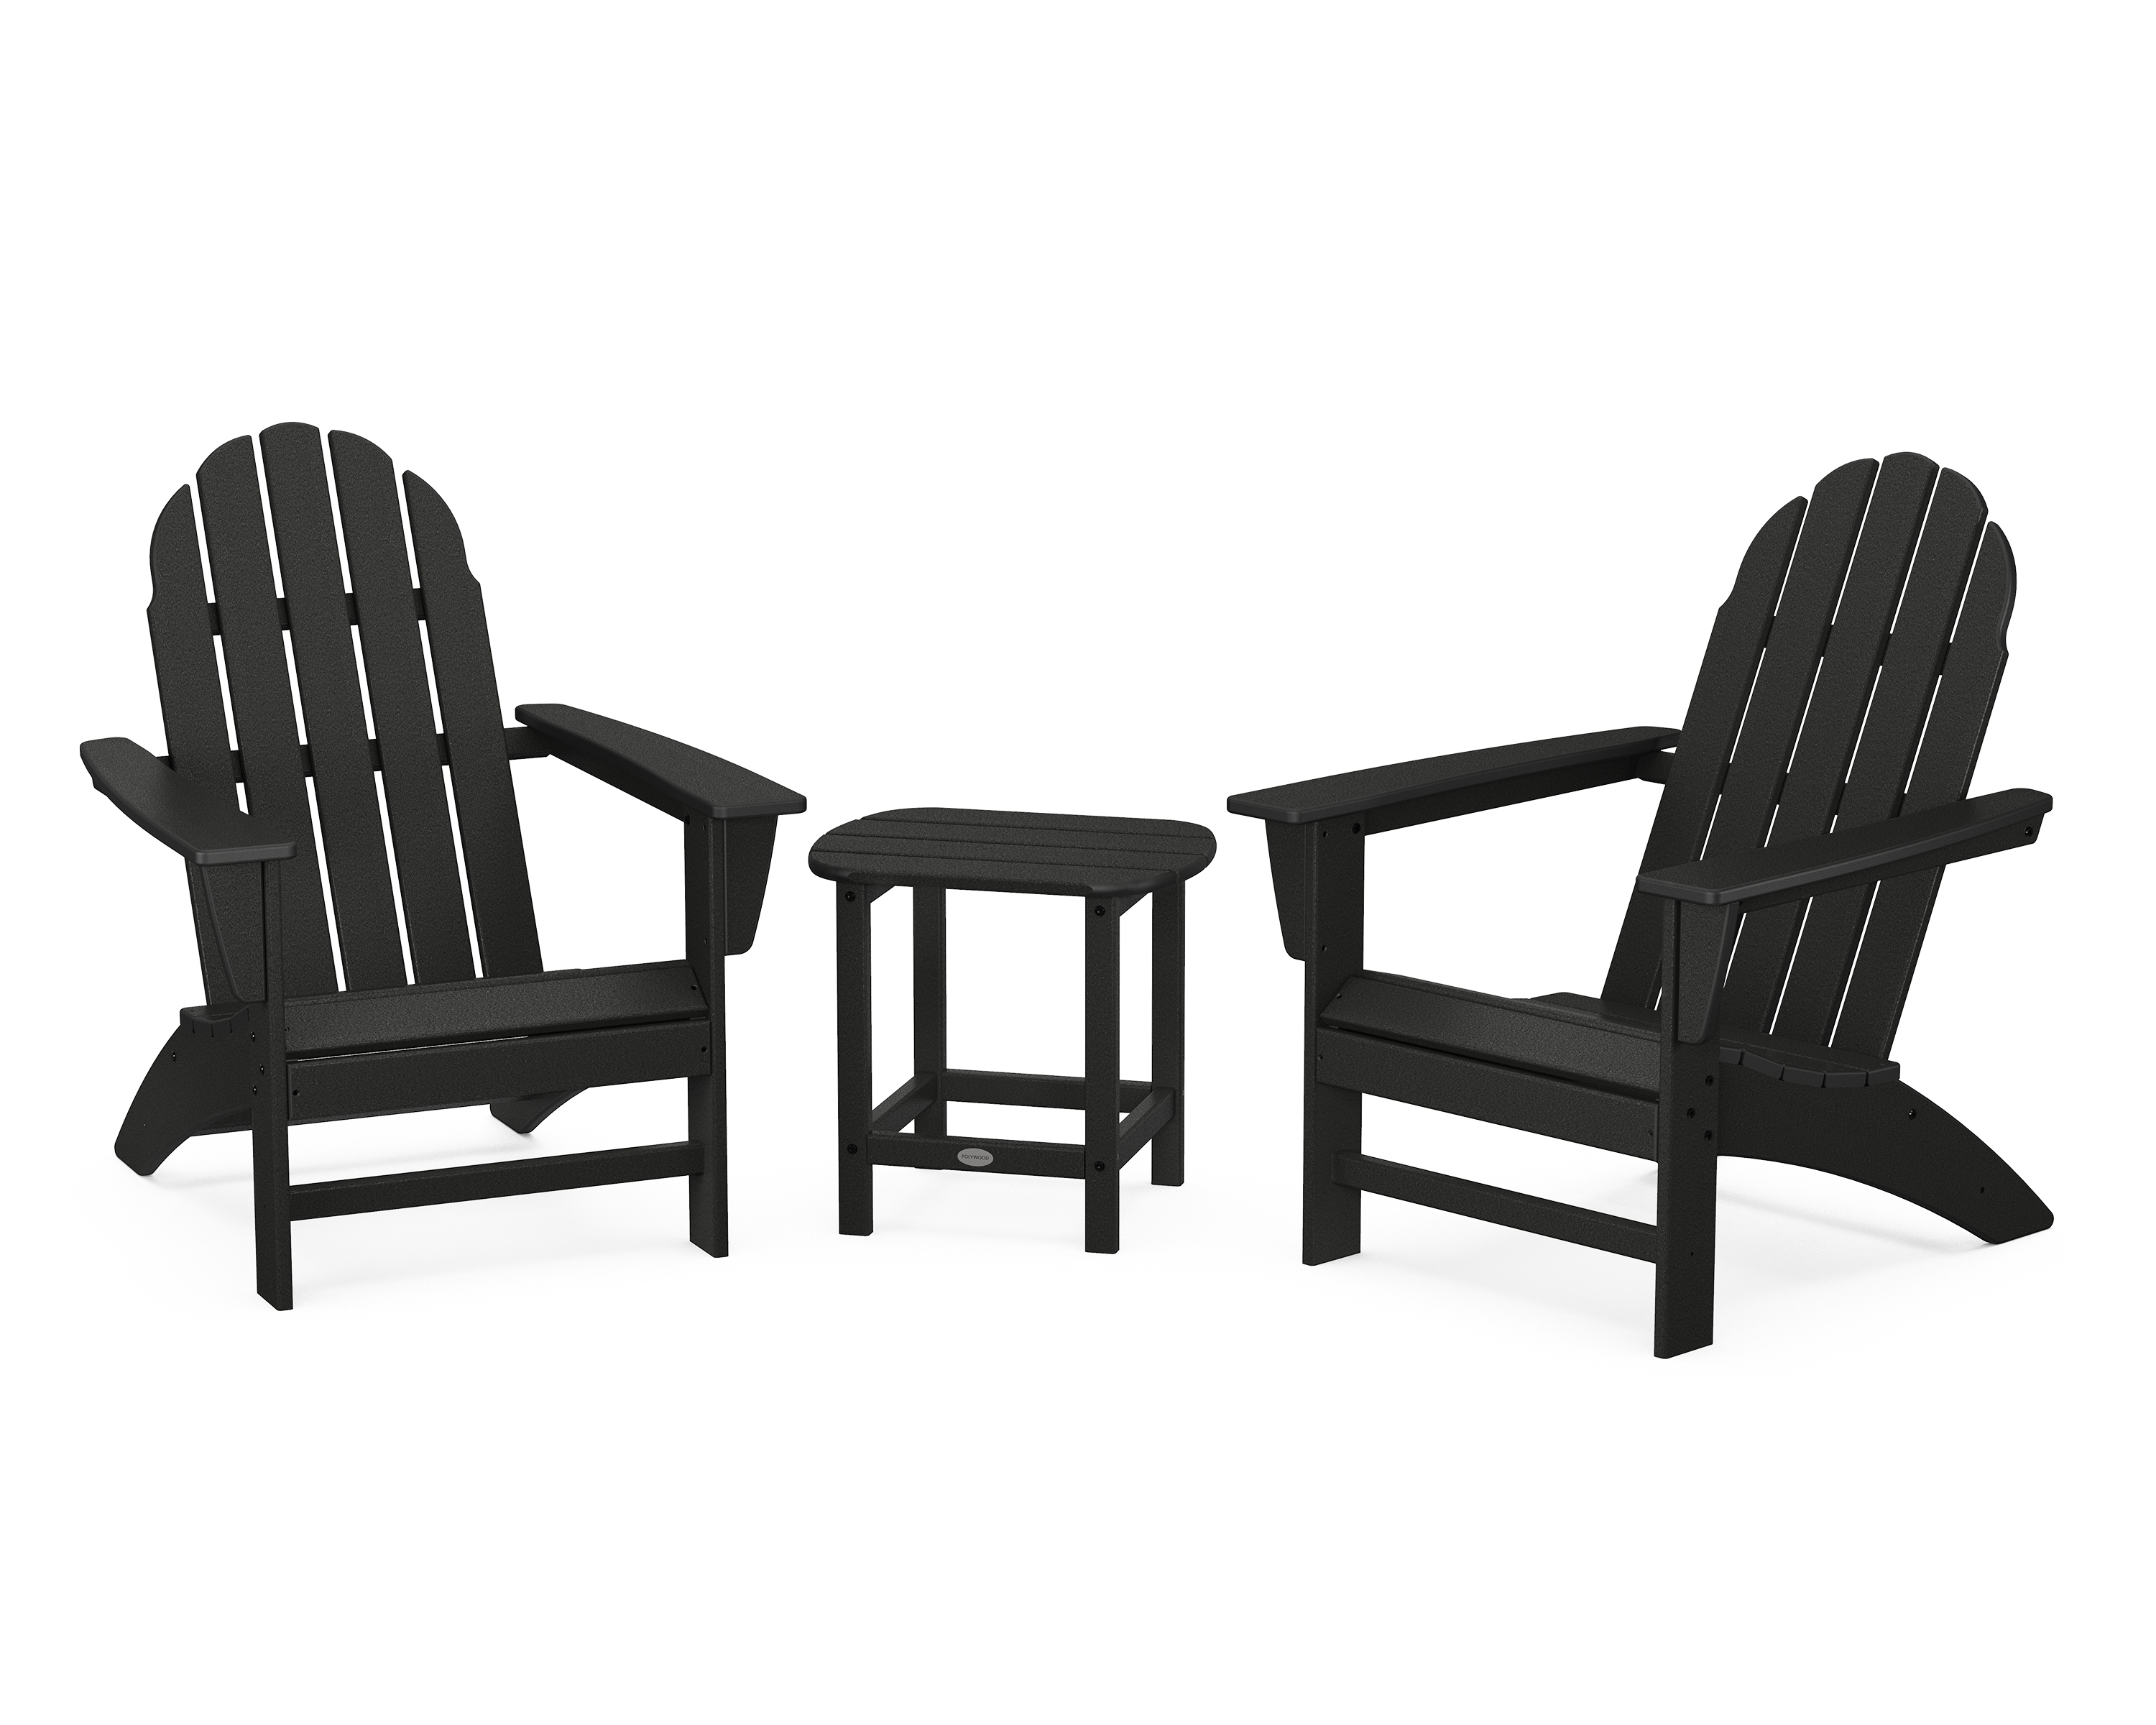 POLYWOOD Vineyard 3-Piece Adirondack Set with South Beach 18" Side Table in Black - image 1 of 1